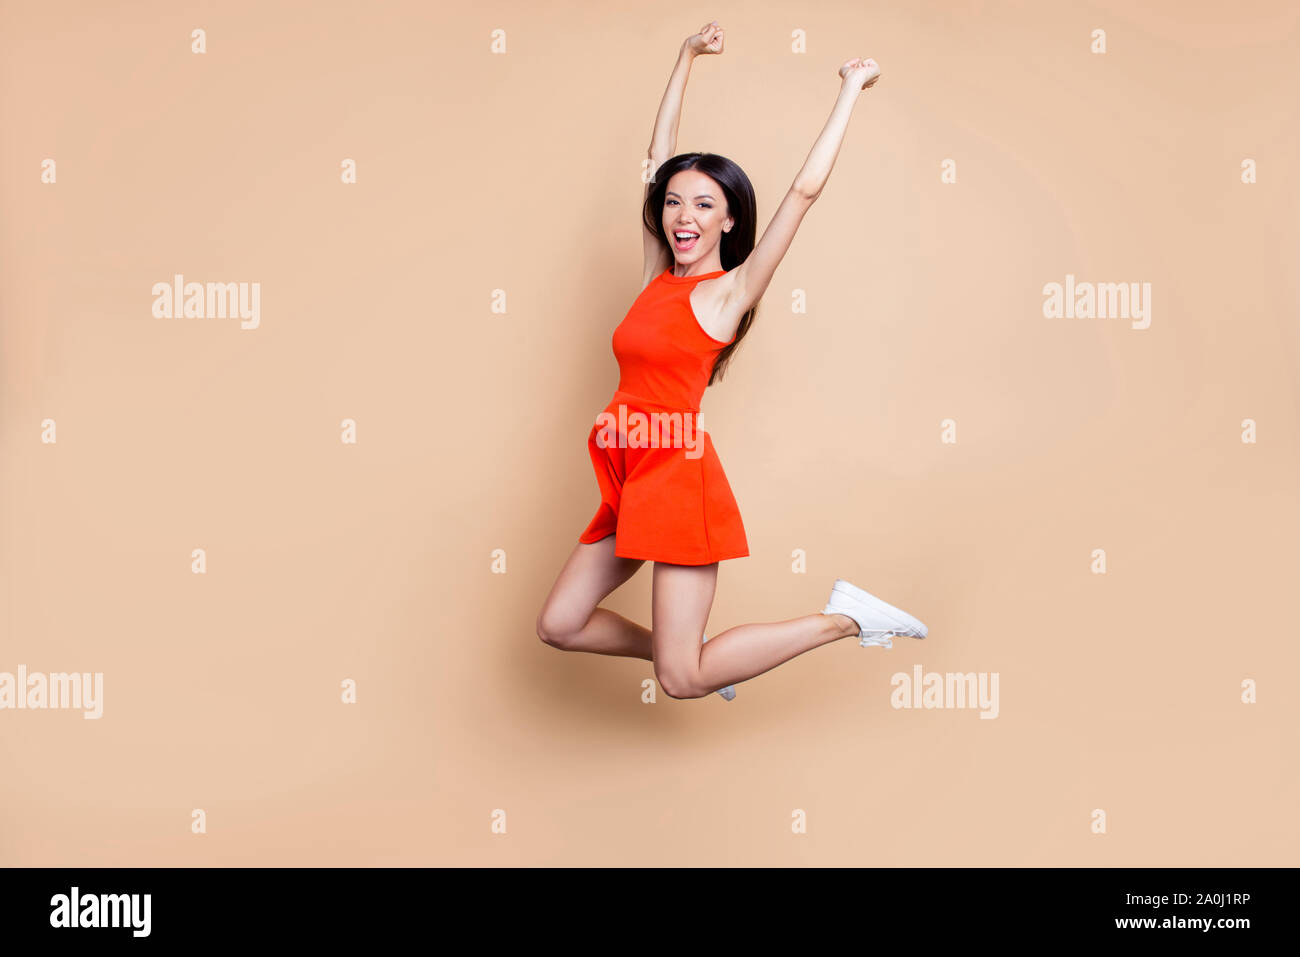 Full body length size photo portrait of mad cheerful ecstatic re Stock Photo